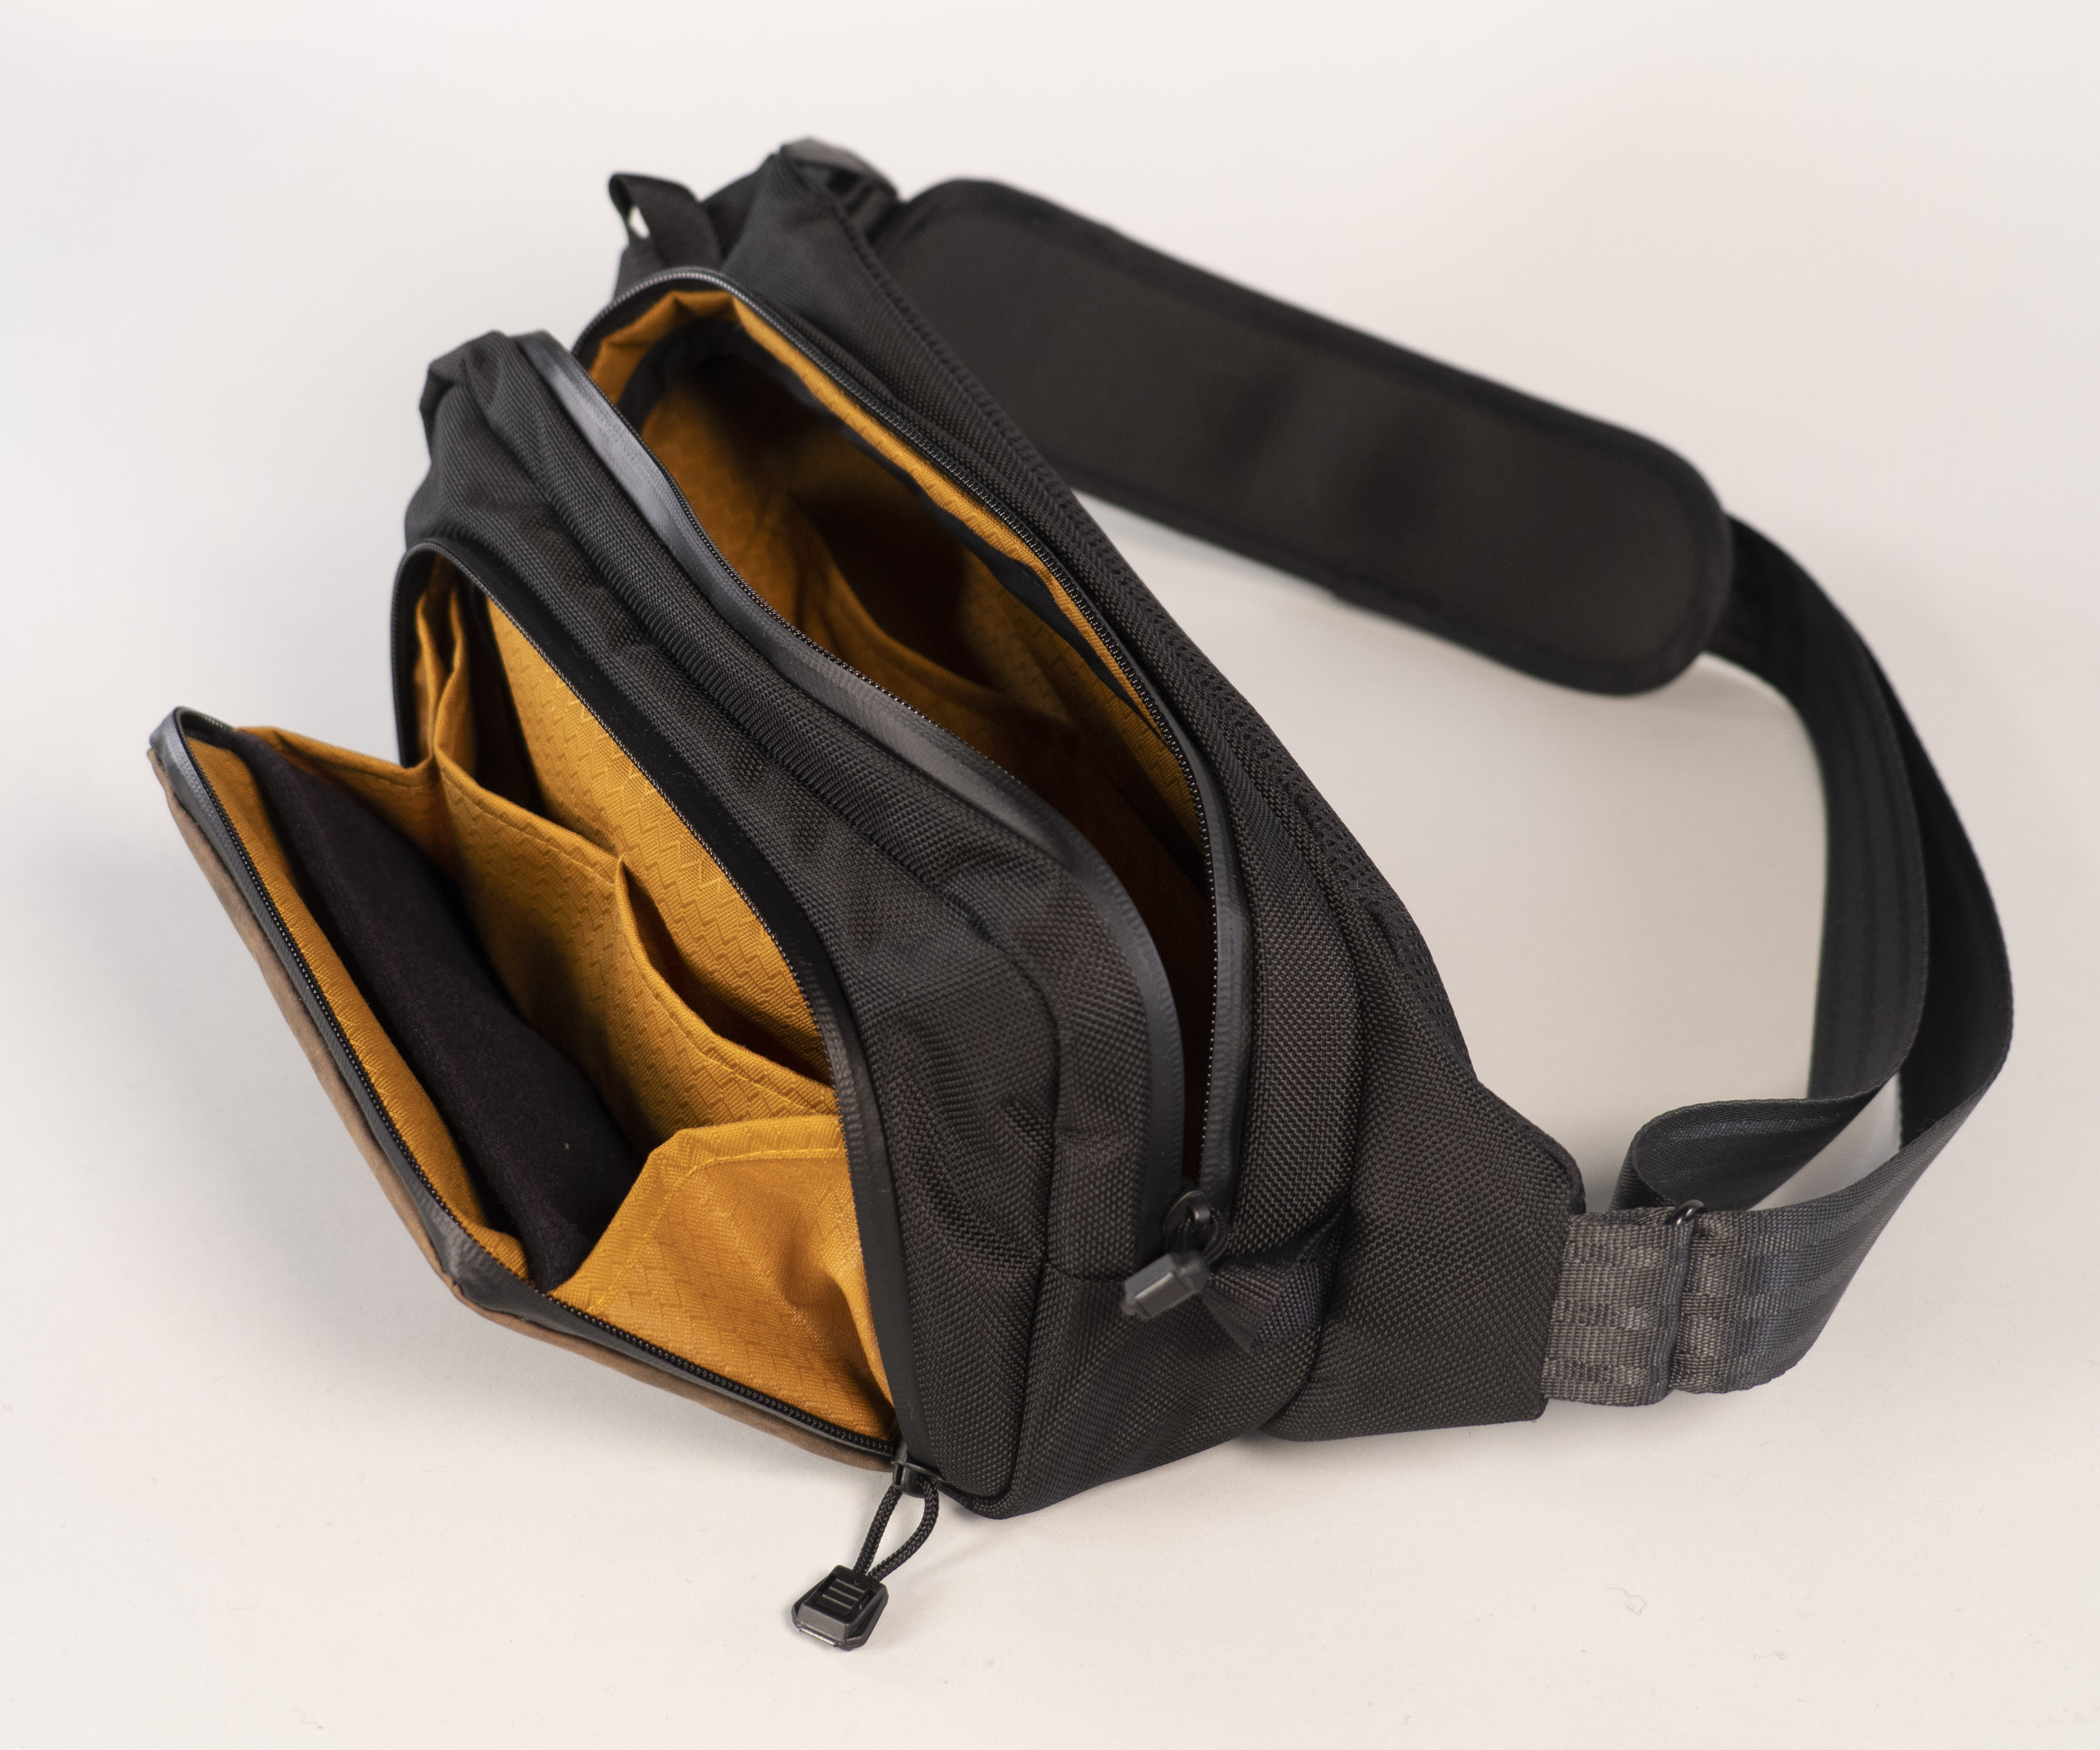 Dual compartments, each with interior organizational pockets